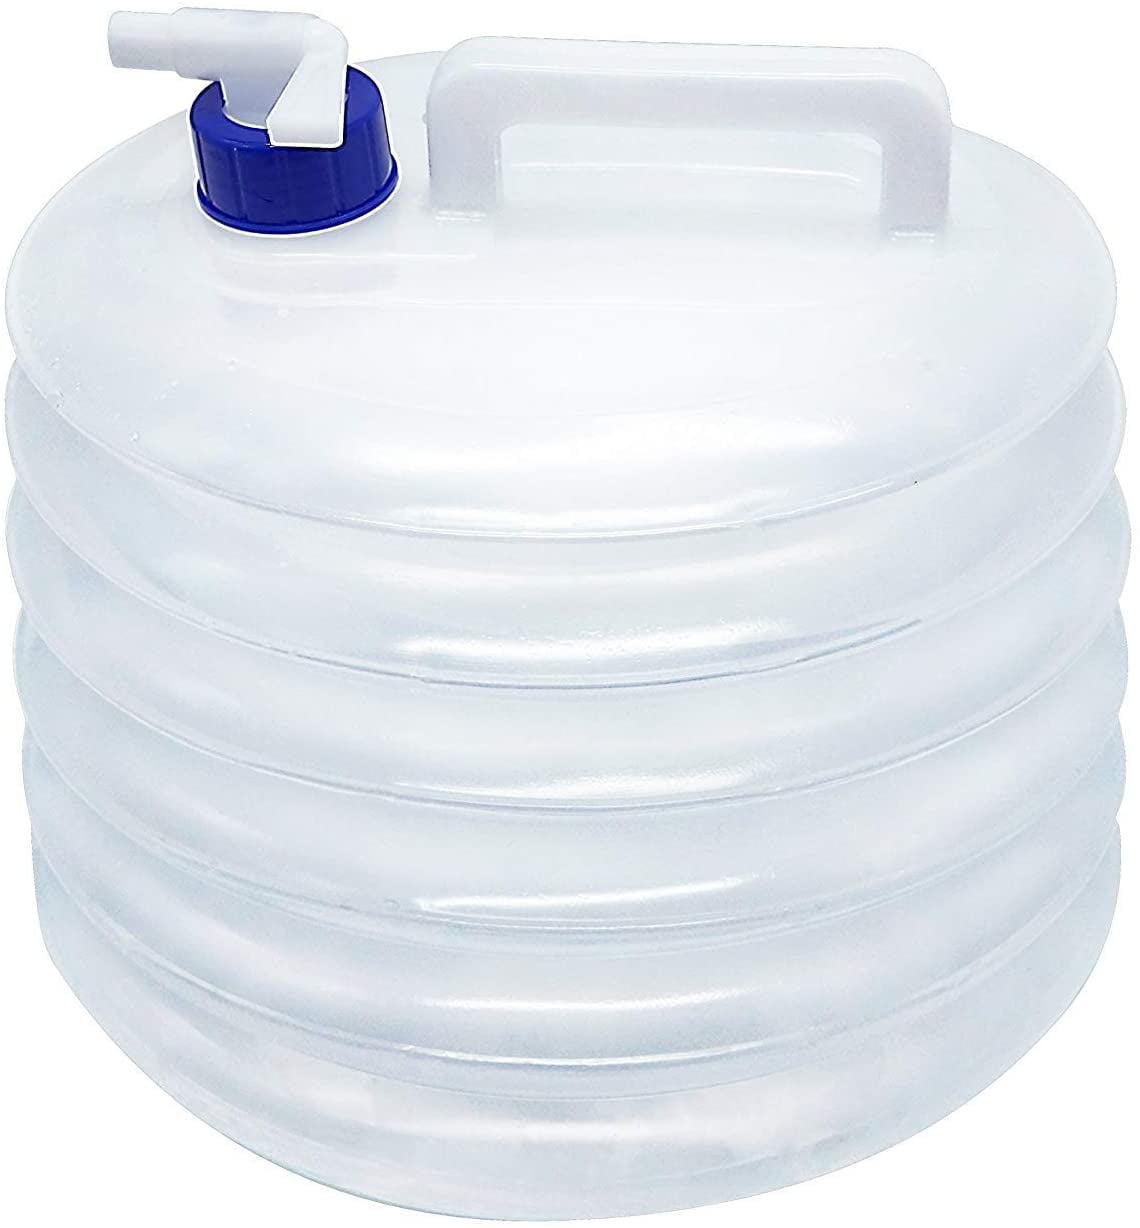 Details about    Collapsible Water Container Premium Portable Water Storage Jug Food 2.6 Gal